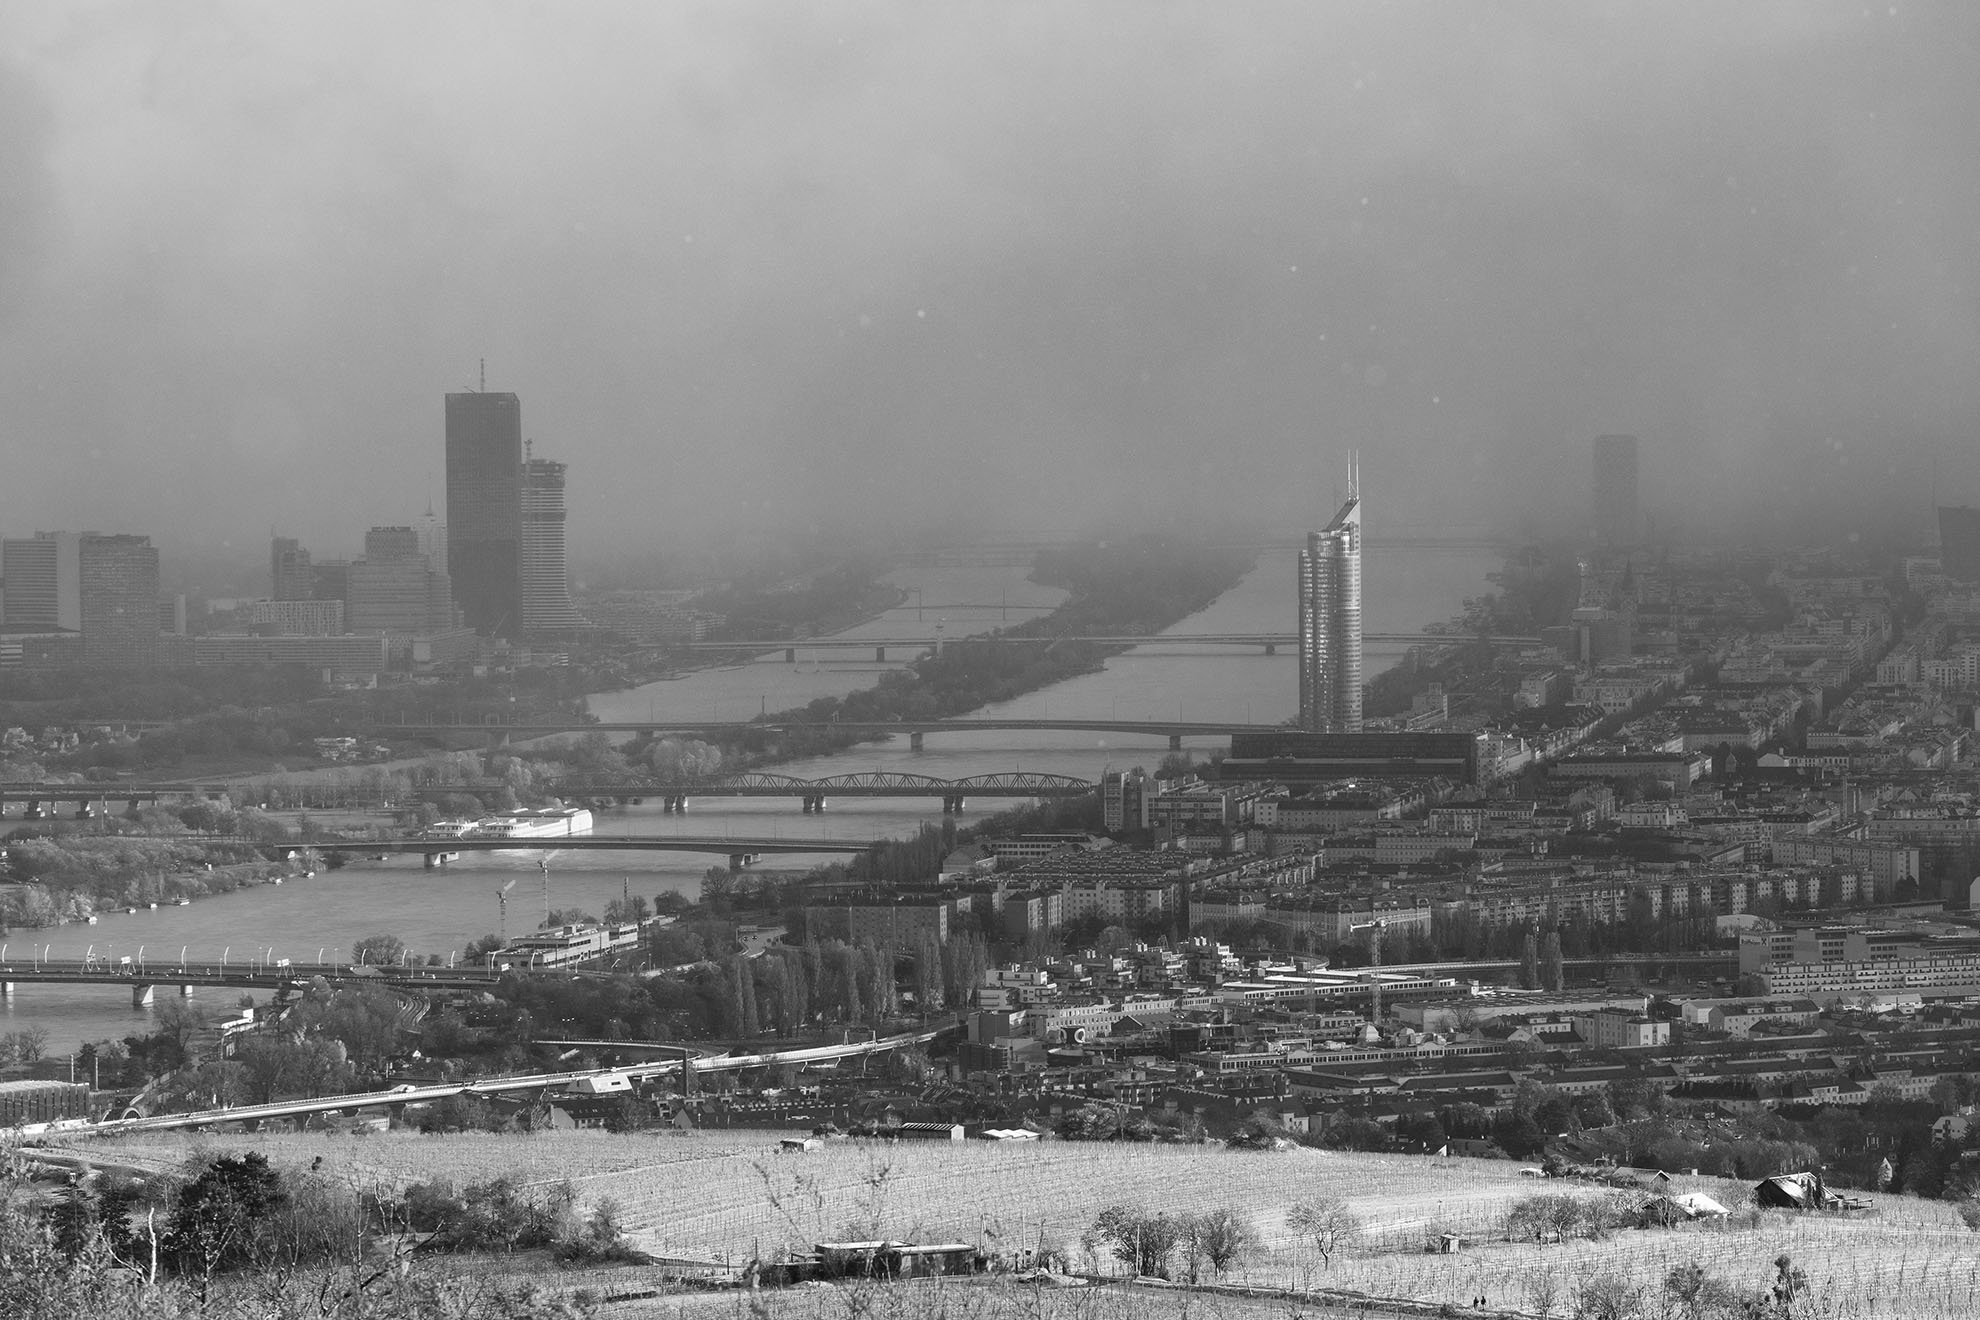  A snowstorm recedes to reveal the River Danube in Vienna. 